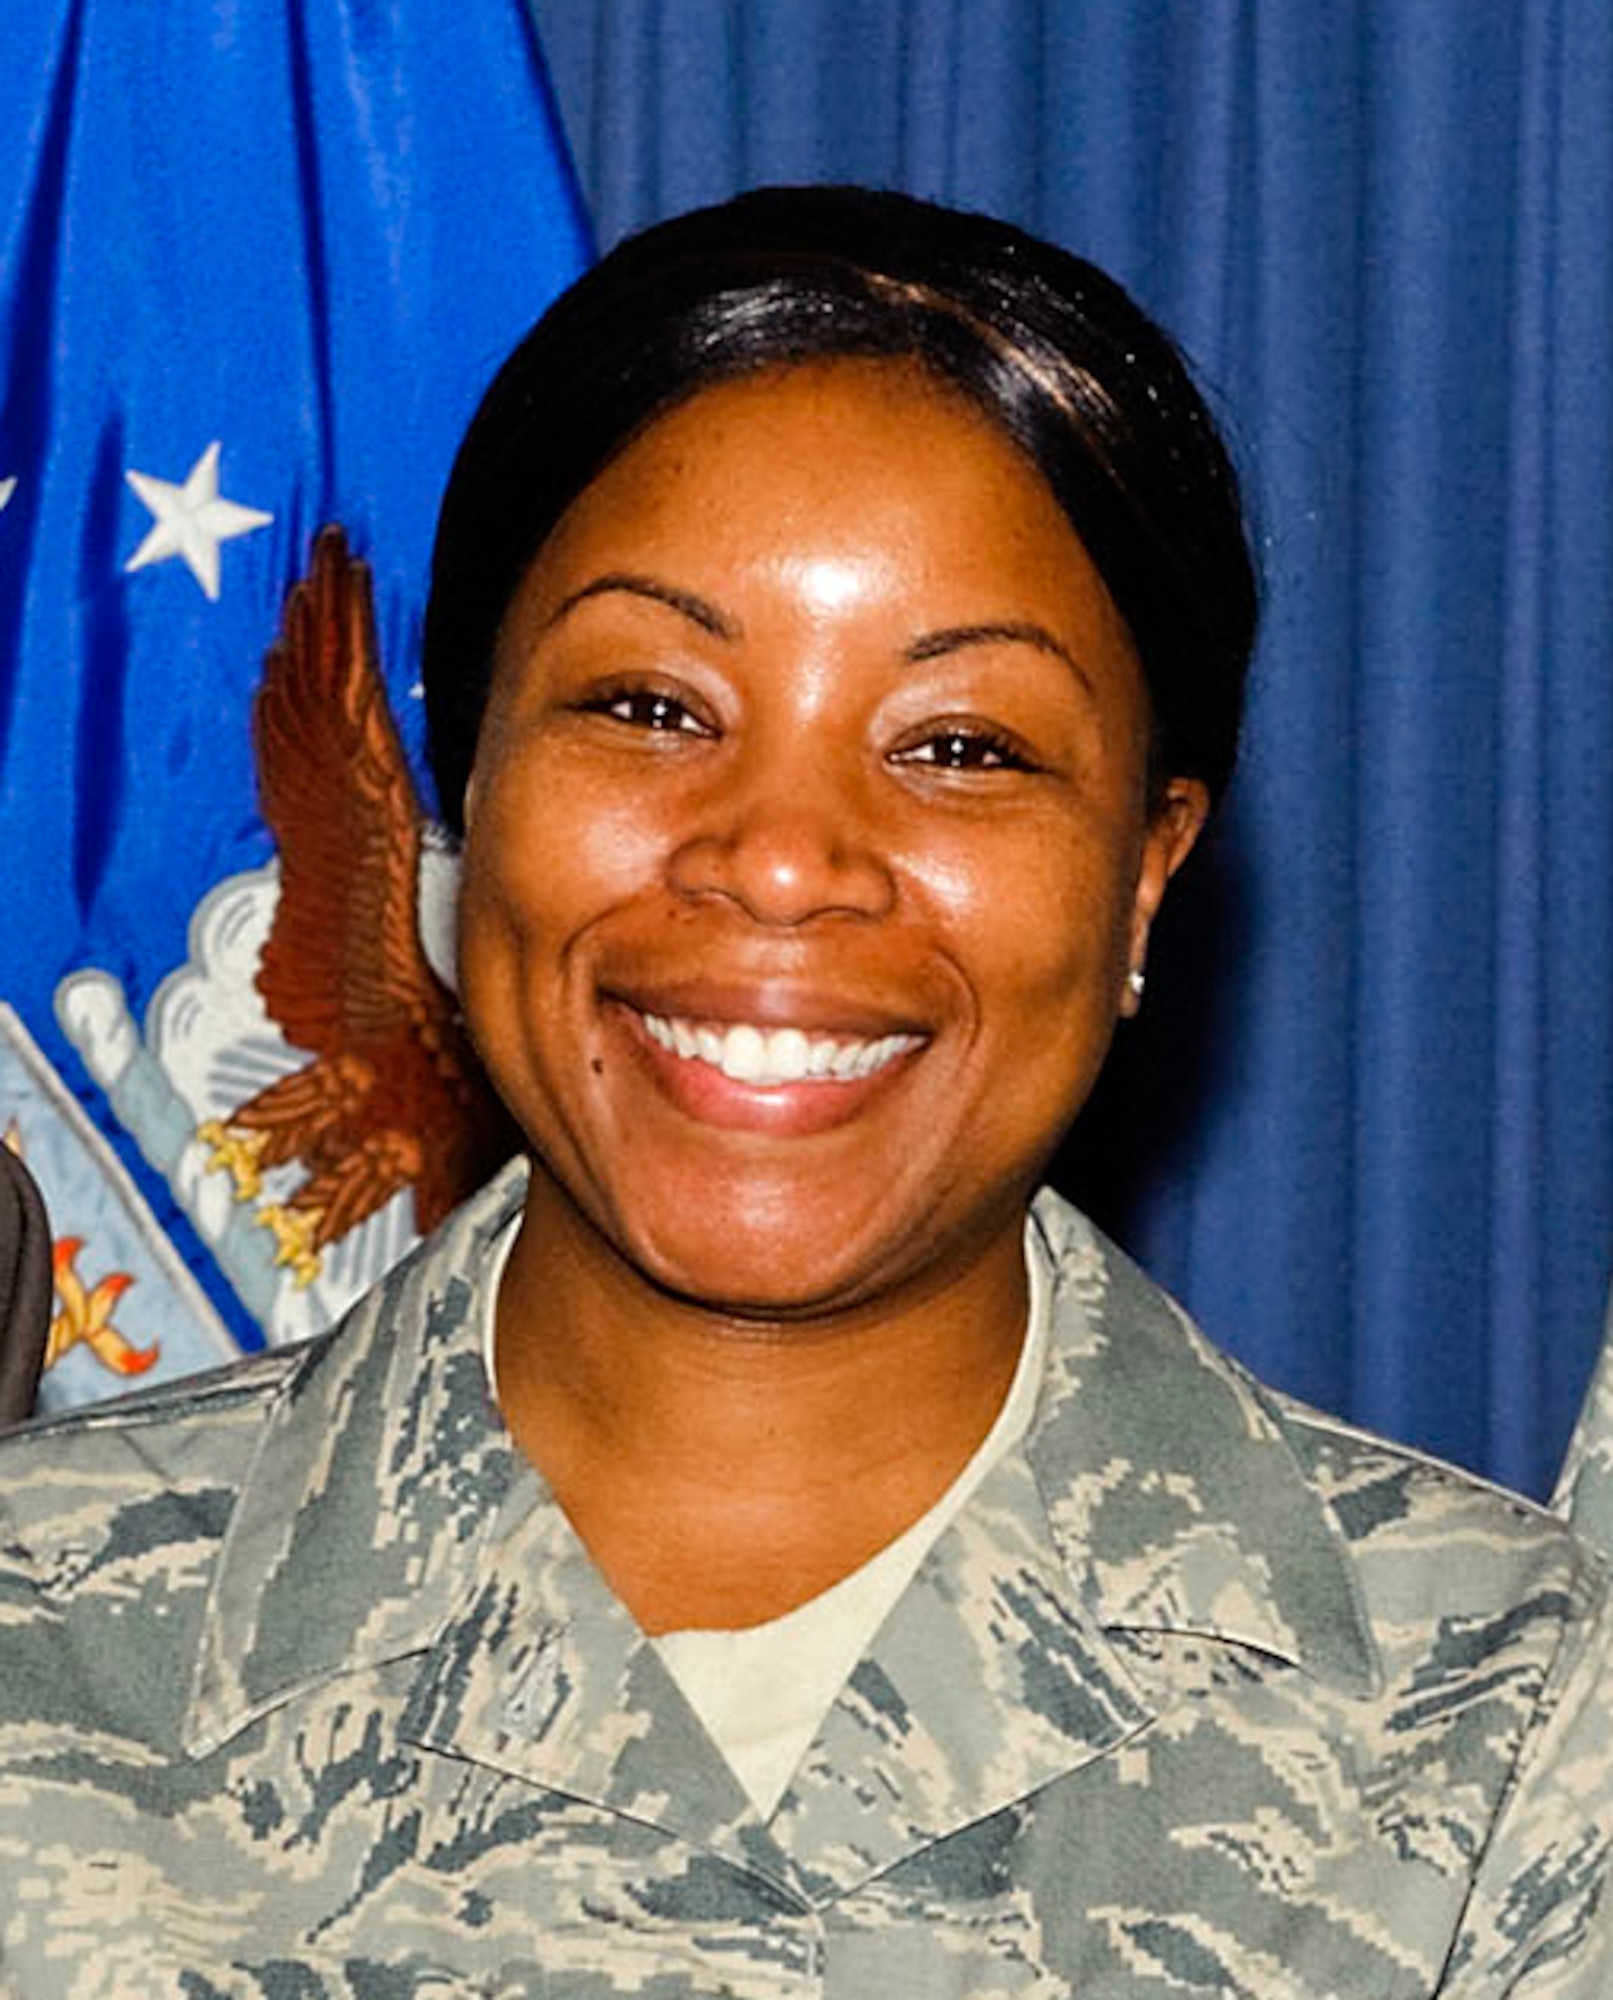 Master Sergeant Tara R. Brown, 33, of New York, died Apr. 26 near Kabul, Afghanistan of wounds sustained from an Afghan gunman who also killed seven other Airmen as well as an American civilian contractor in a shooting spree in the Afghan Air Force compound in Kabul, officials said. (U.S. Air Force photo)